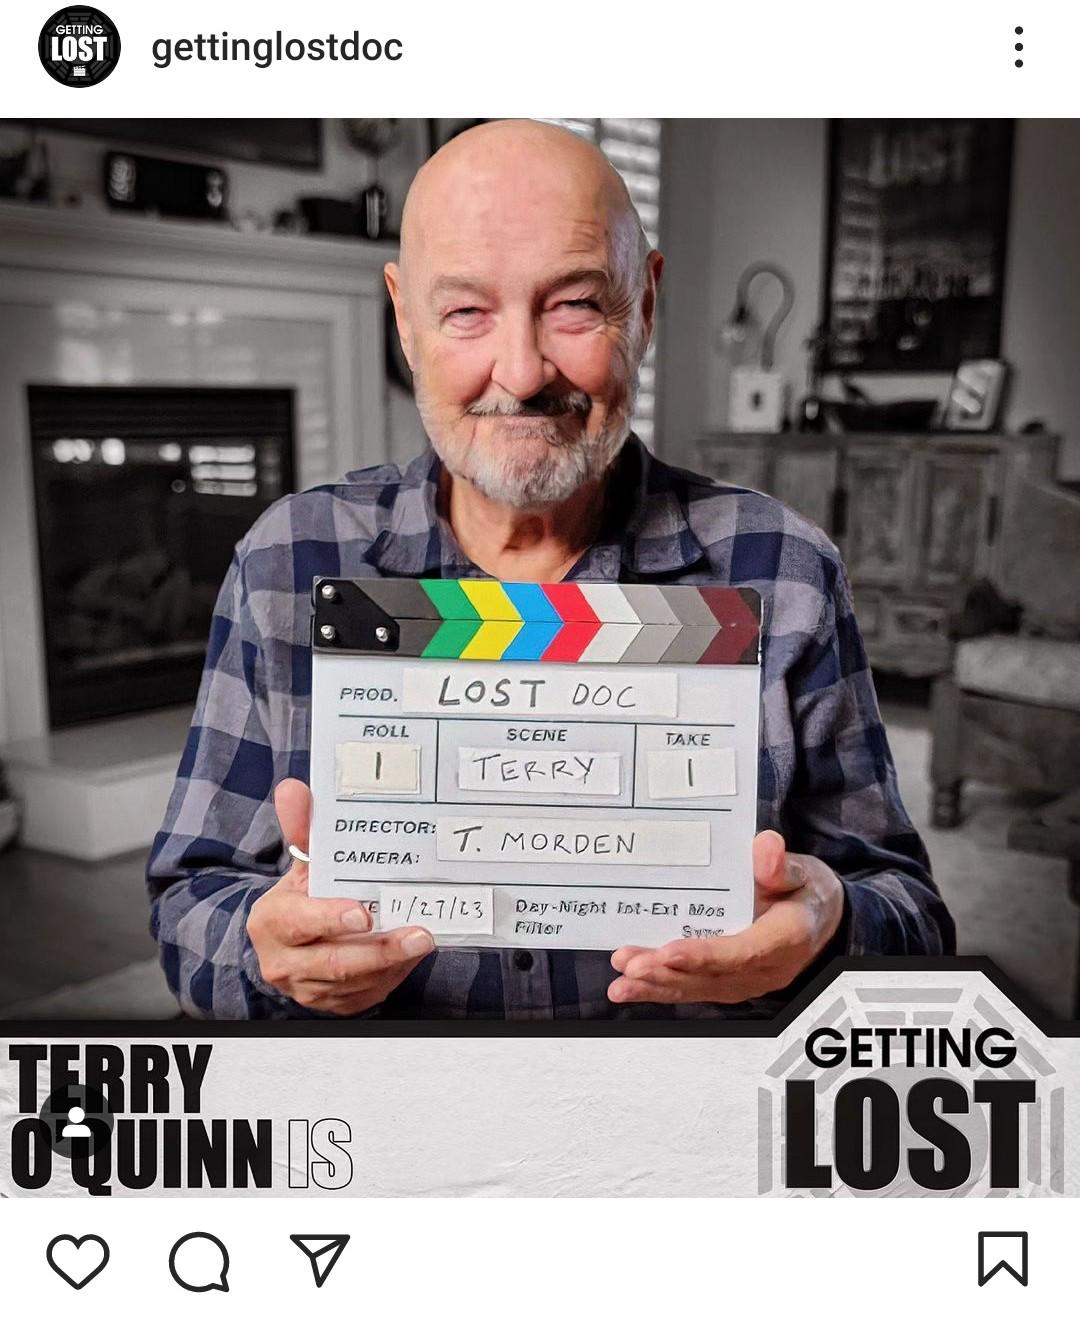 r/lost - TERRY O'QUINN OFFICIALLY CONFIRMED IN THE LOST DOCUMENTARY !!!